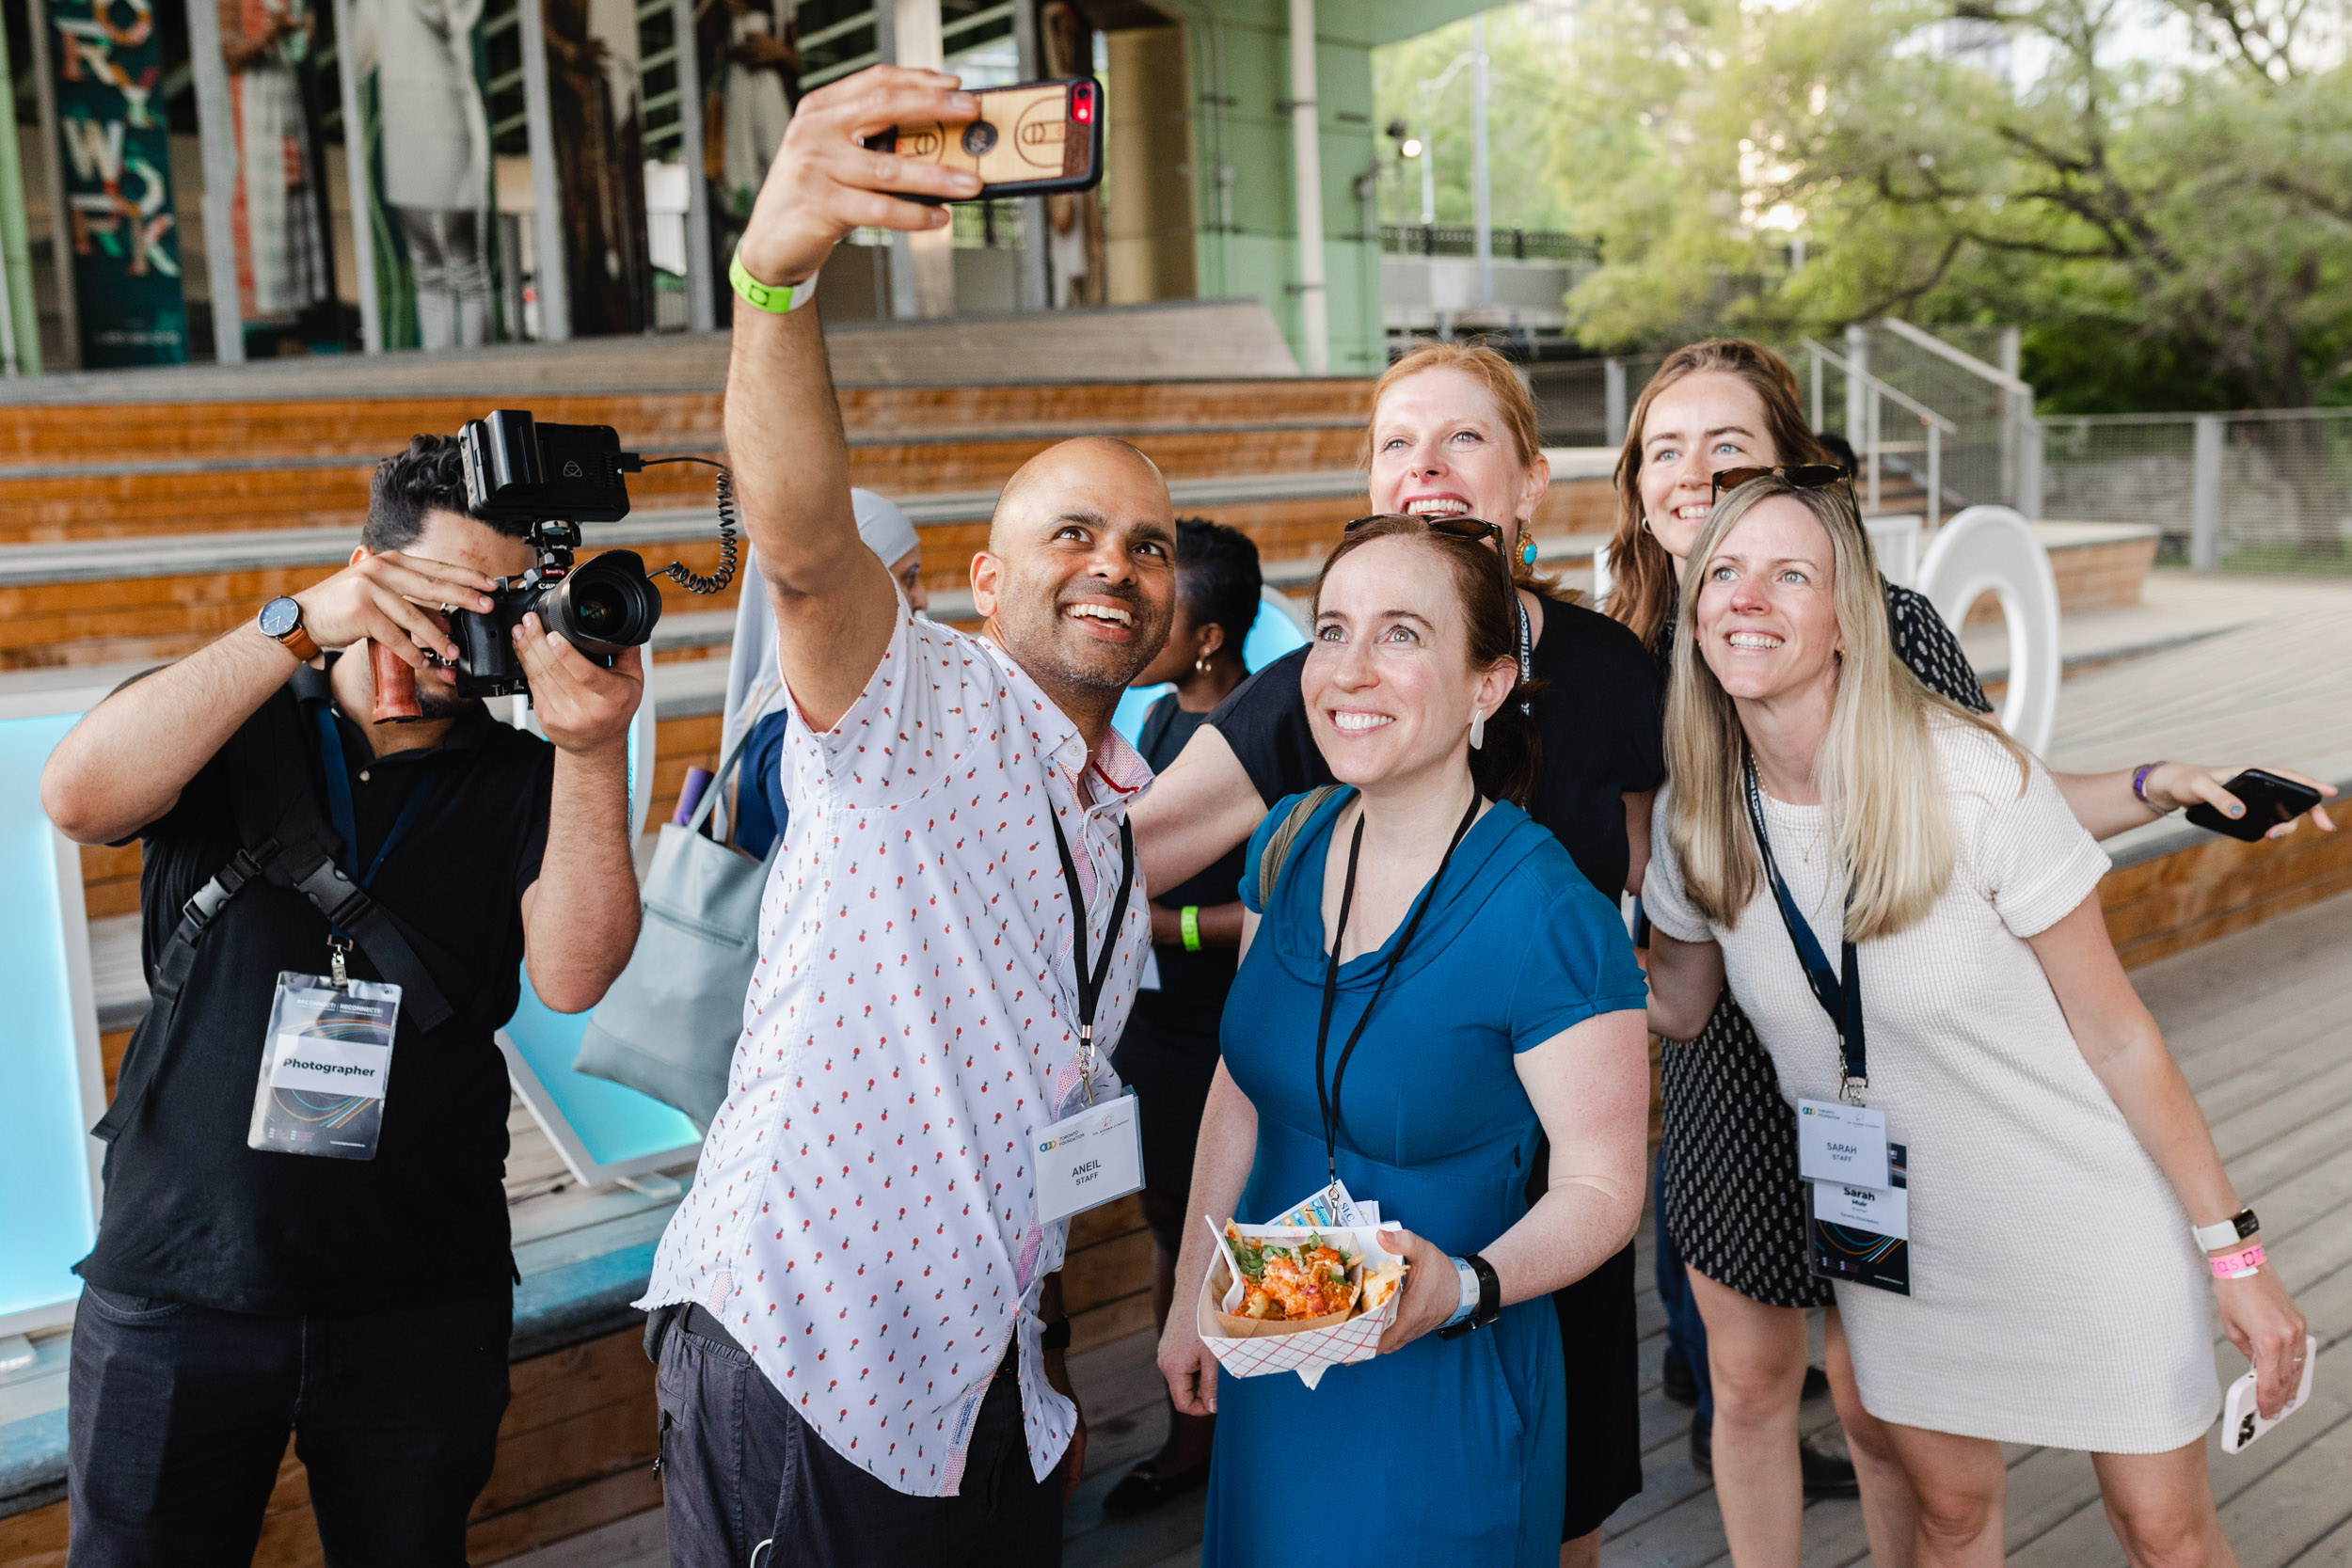 Conference attendees taking a selfie at an outdoor event.